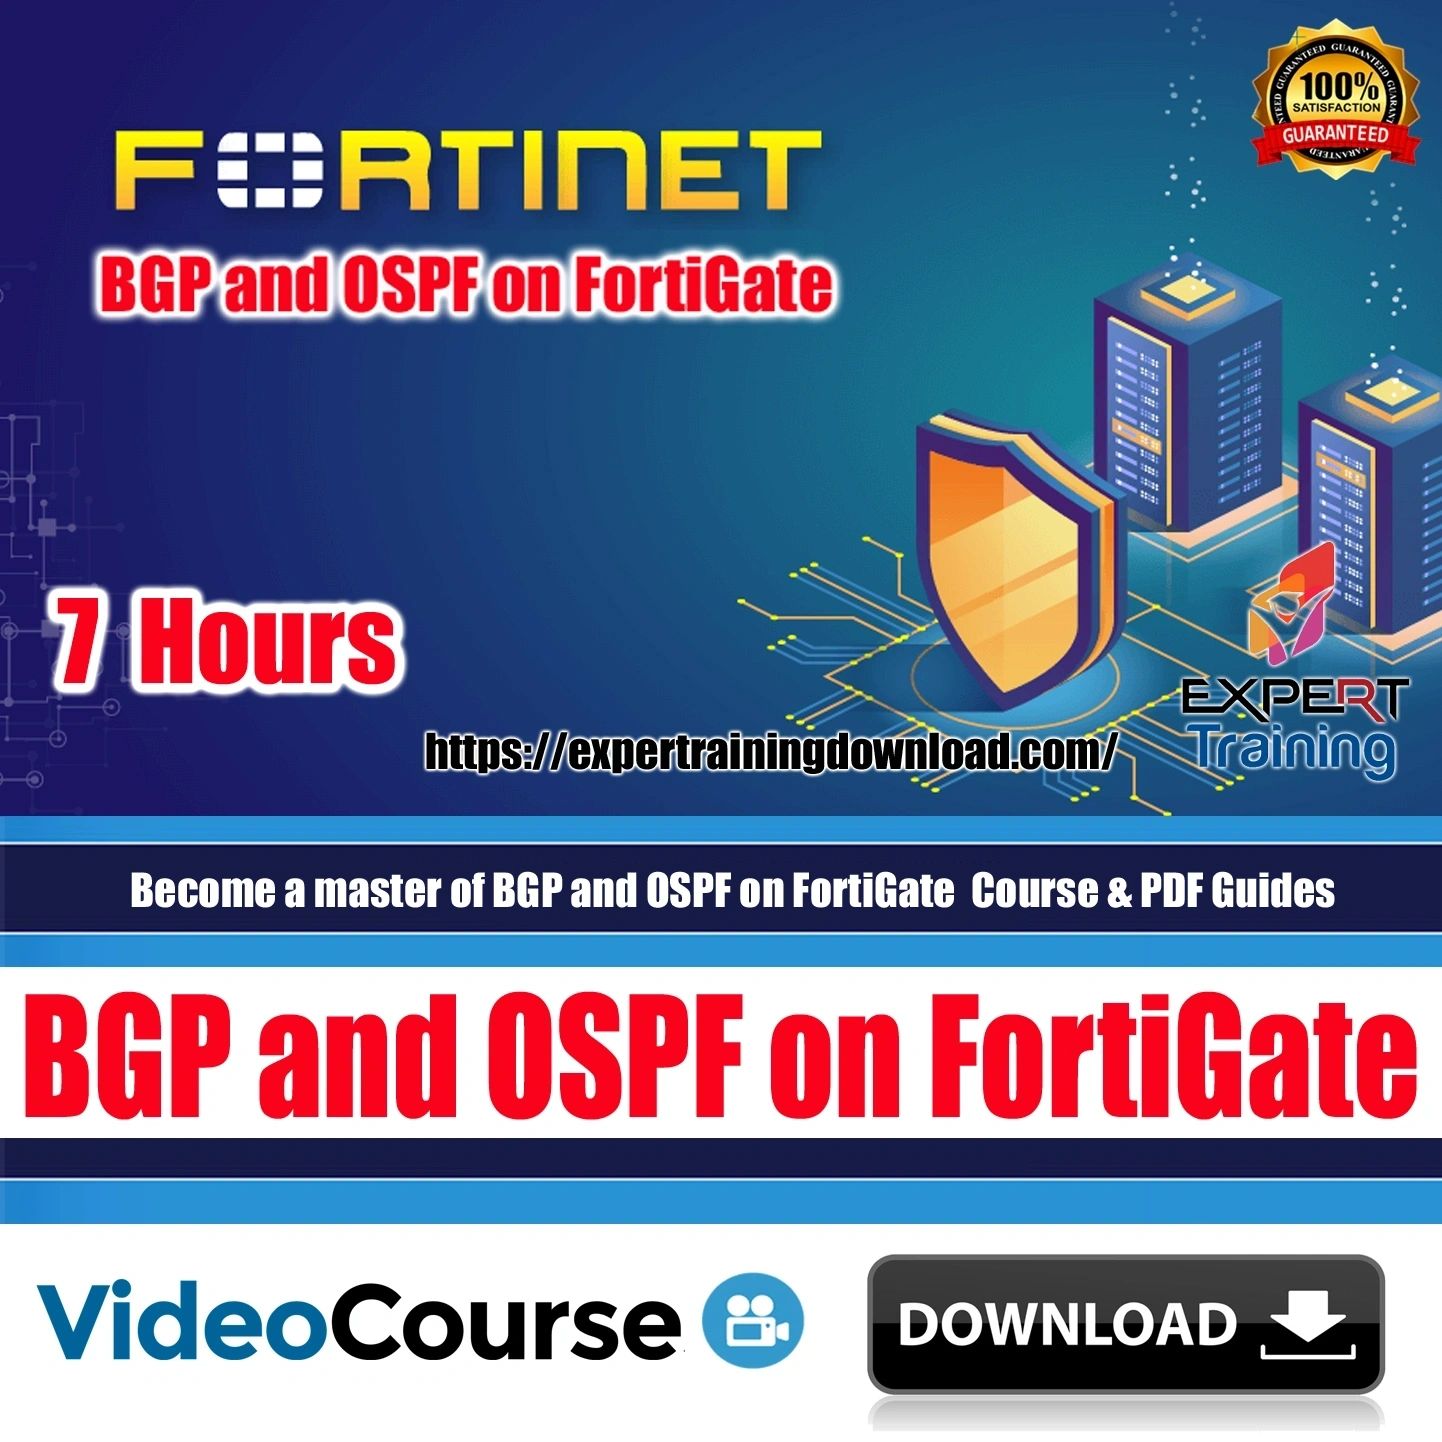 Become a master of BGP and OSPF on FortiGate Course & PDF Guides